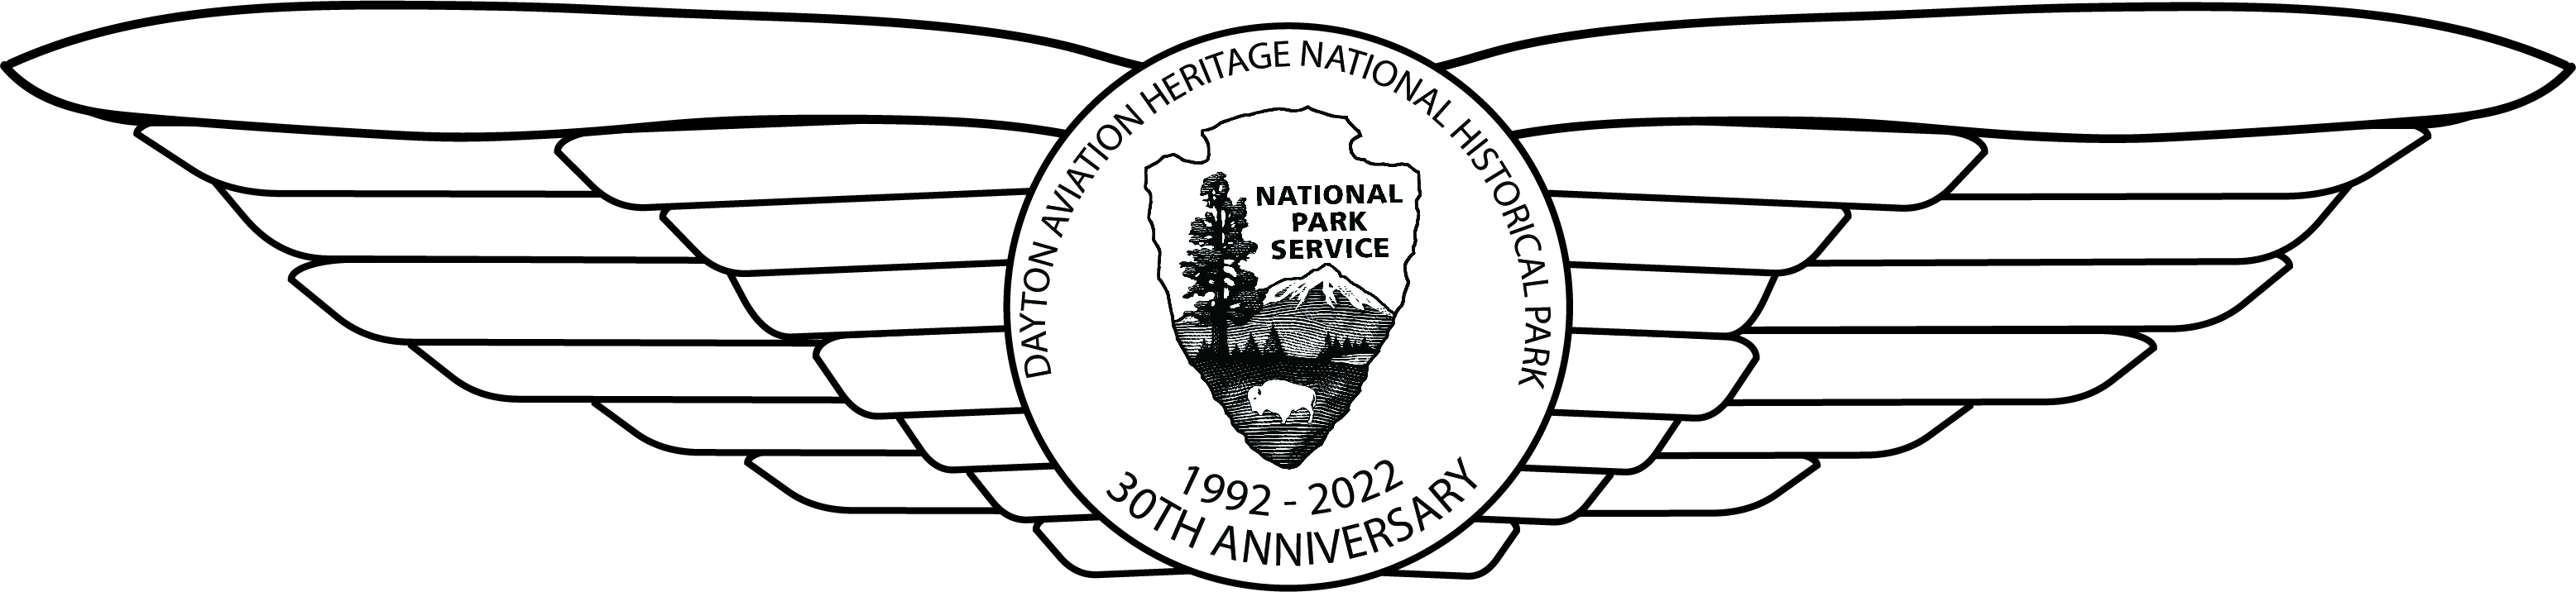 Image of 30th anniversary logo. An NPS arrowhead sits at the center of pilot wings stretch and in the center it reads " Dayton Aviation Heritage National Historical Park, 1992 - 2022, 30th anniversary.